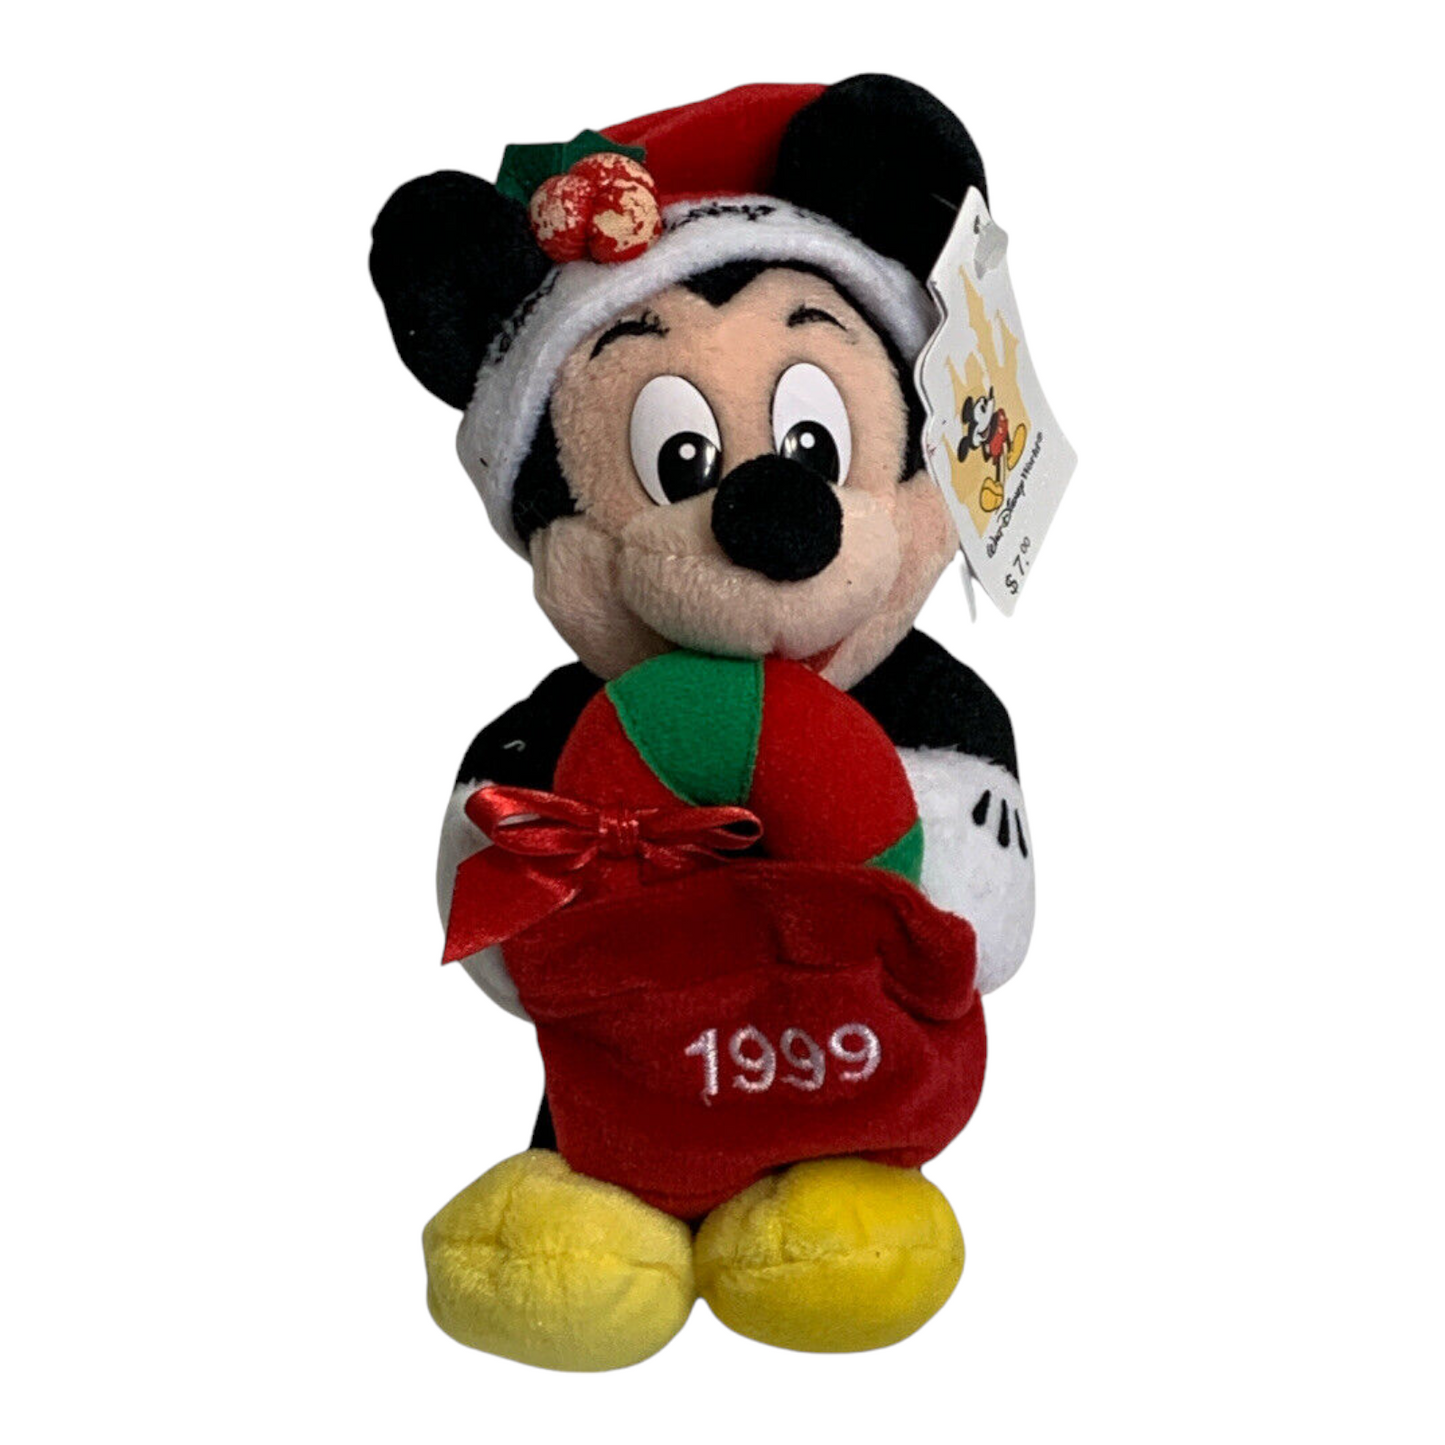 Vintage 1999 Holiday Mickey Mouse Beanie Plush - Limited Edition